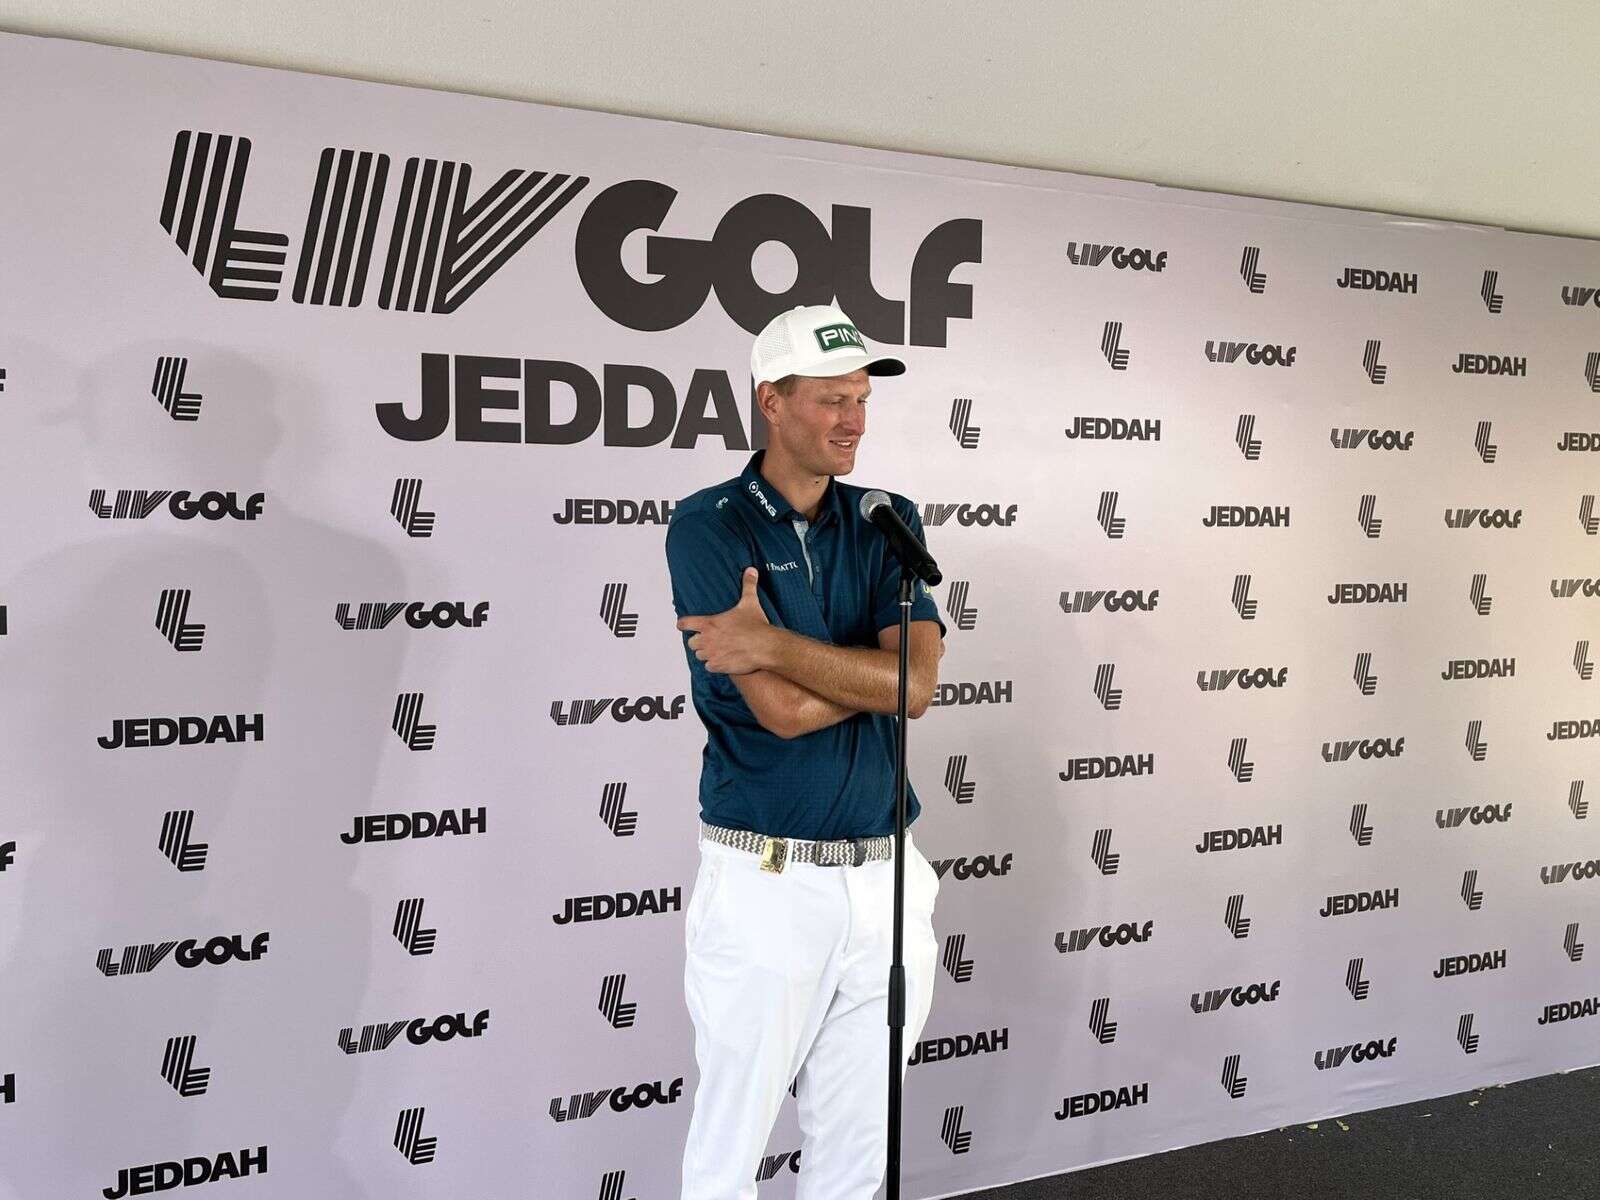 dubai's meronk delivers career-best 62 to tie for the lead at liv golf jeddah